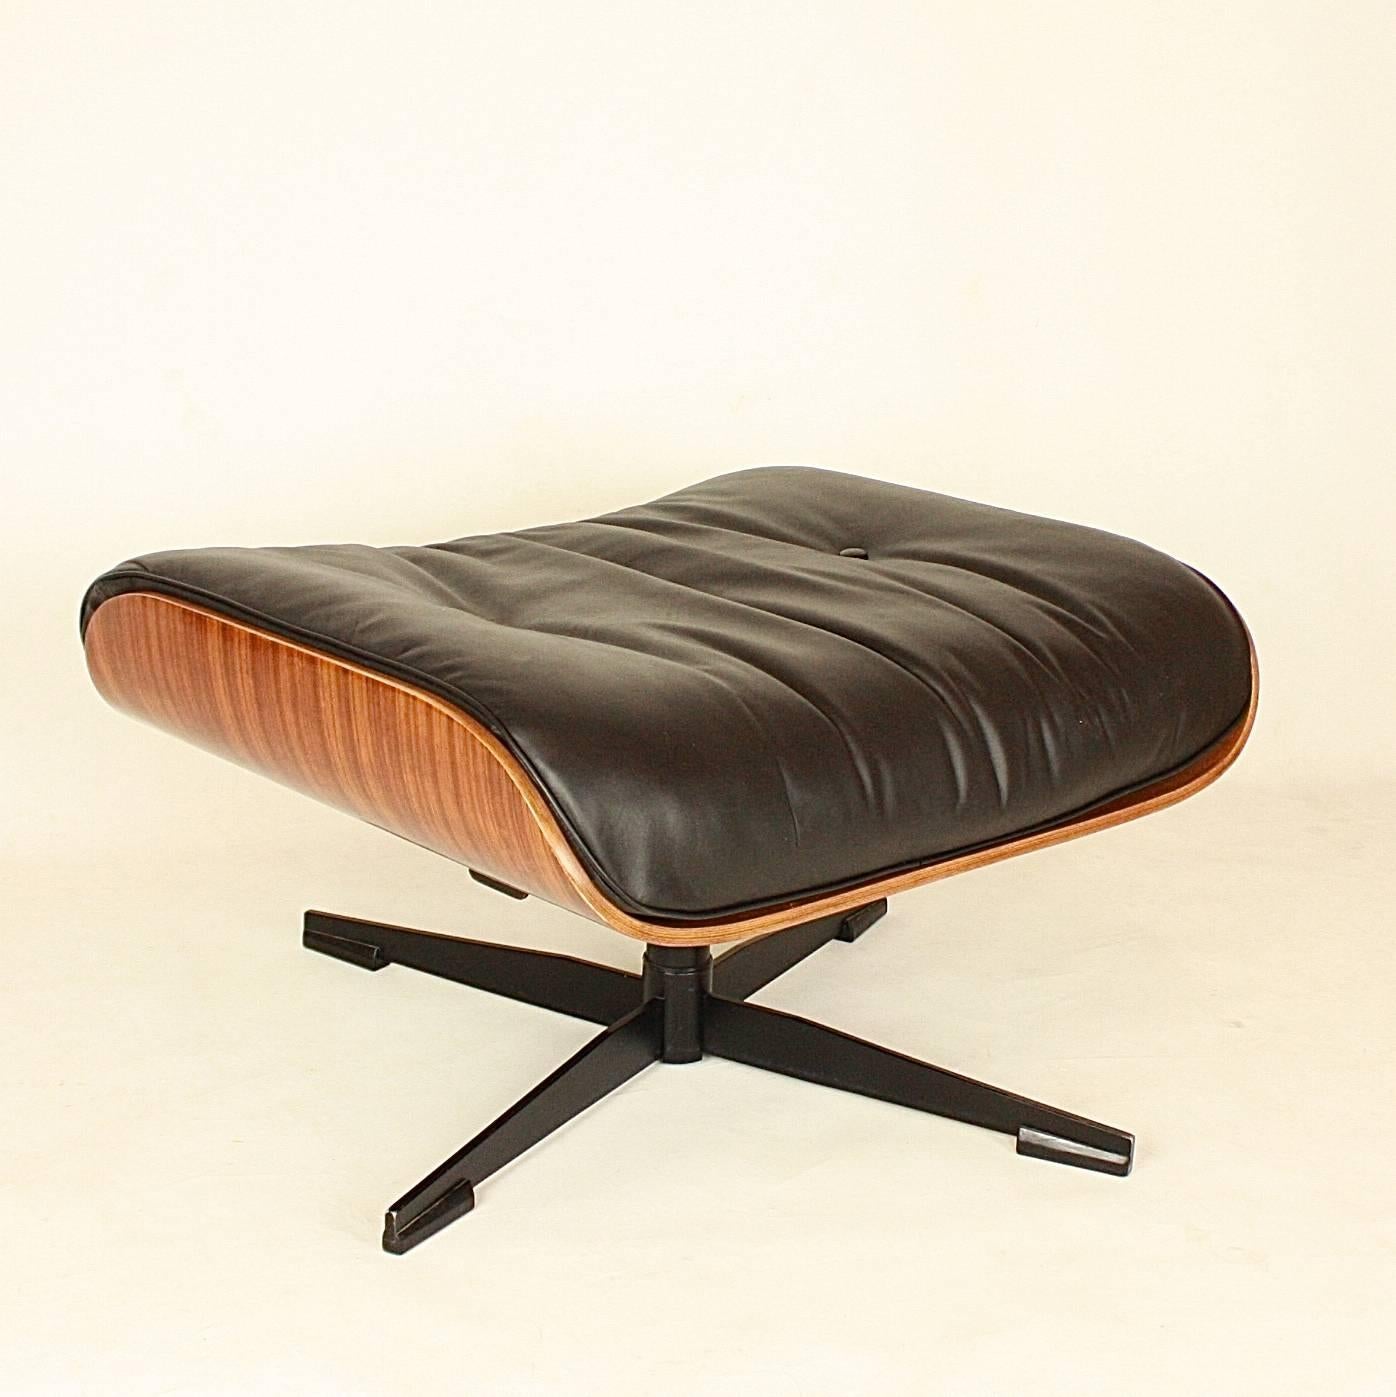 Veneer Pair of Ray and Charles Eames Style Lounge Chair with One Ottoman